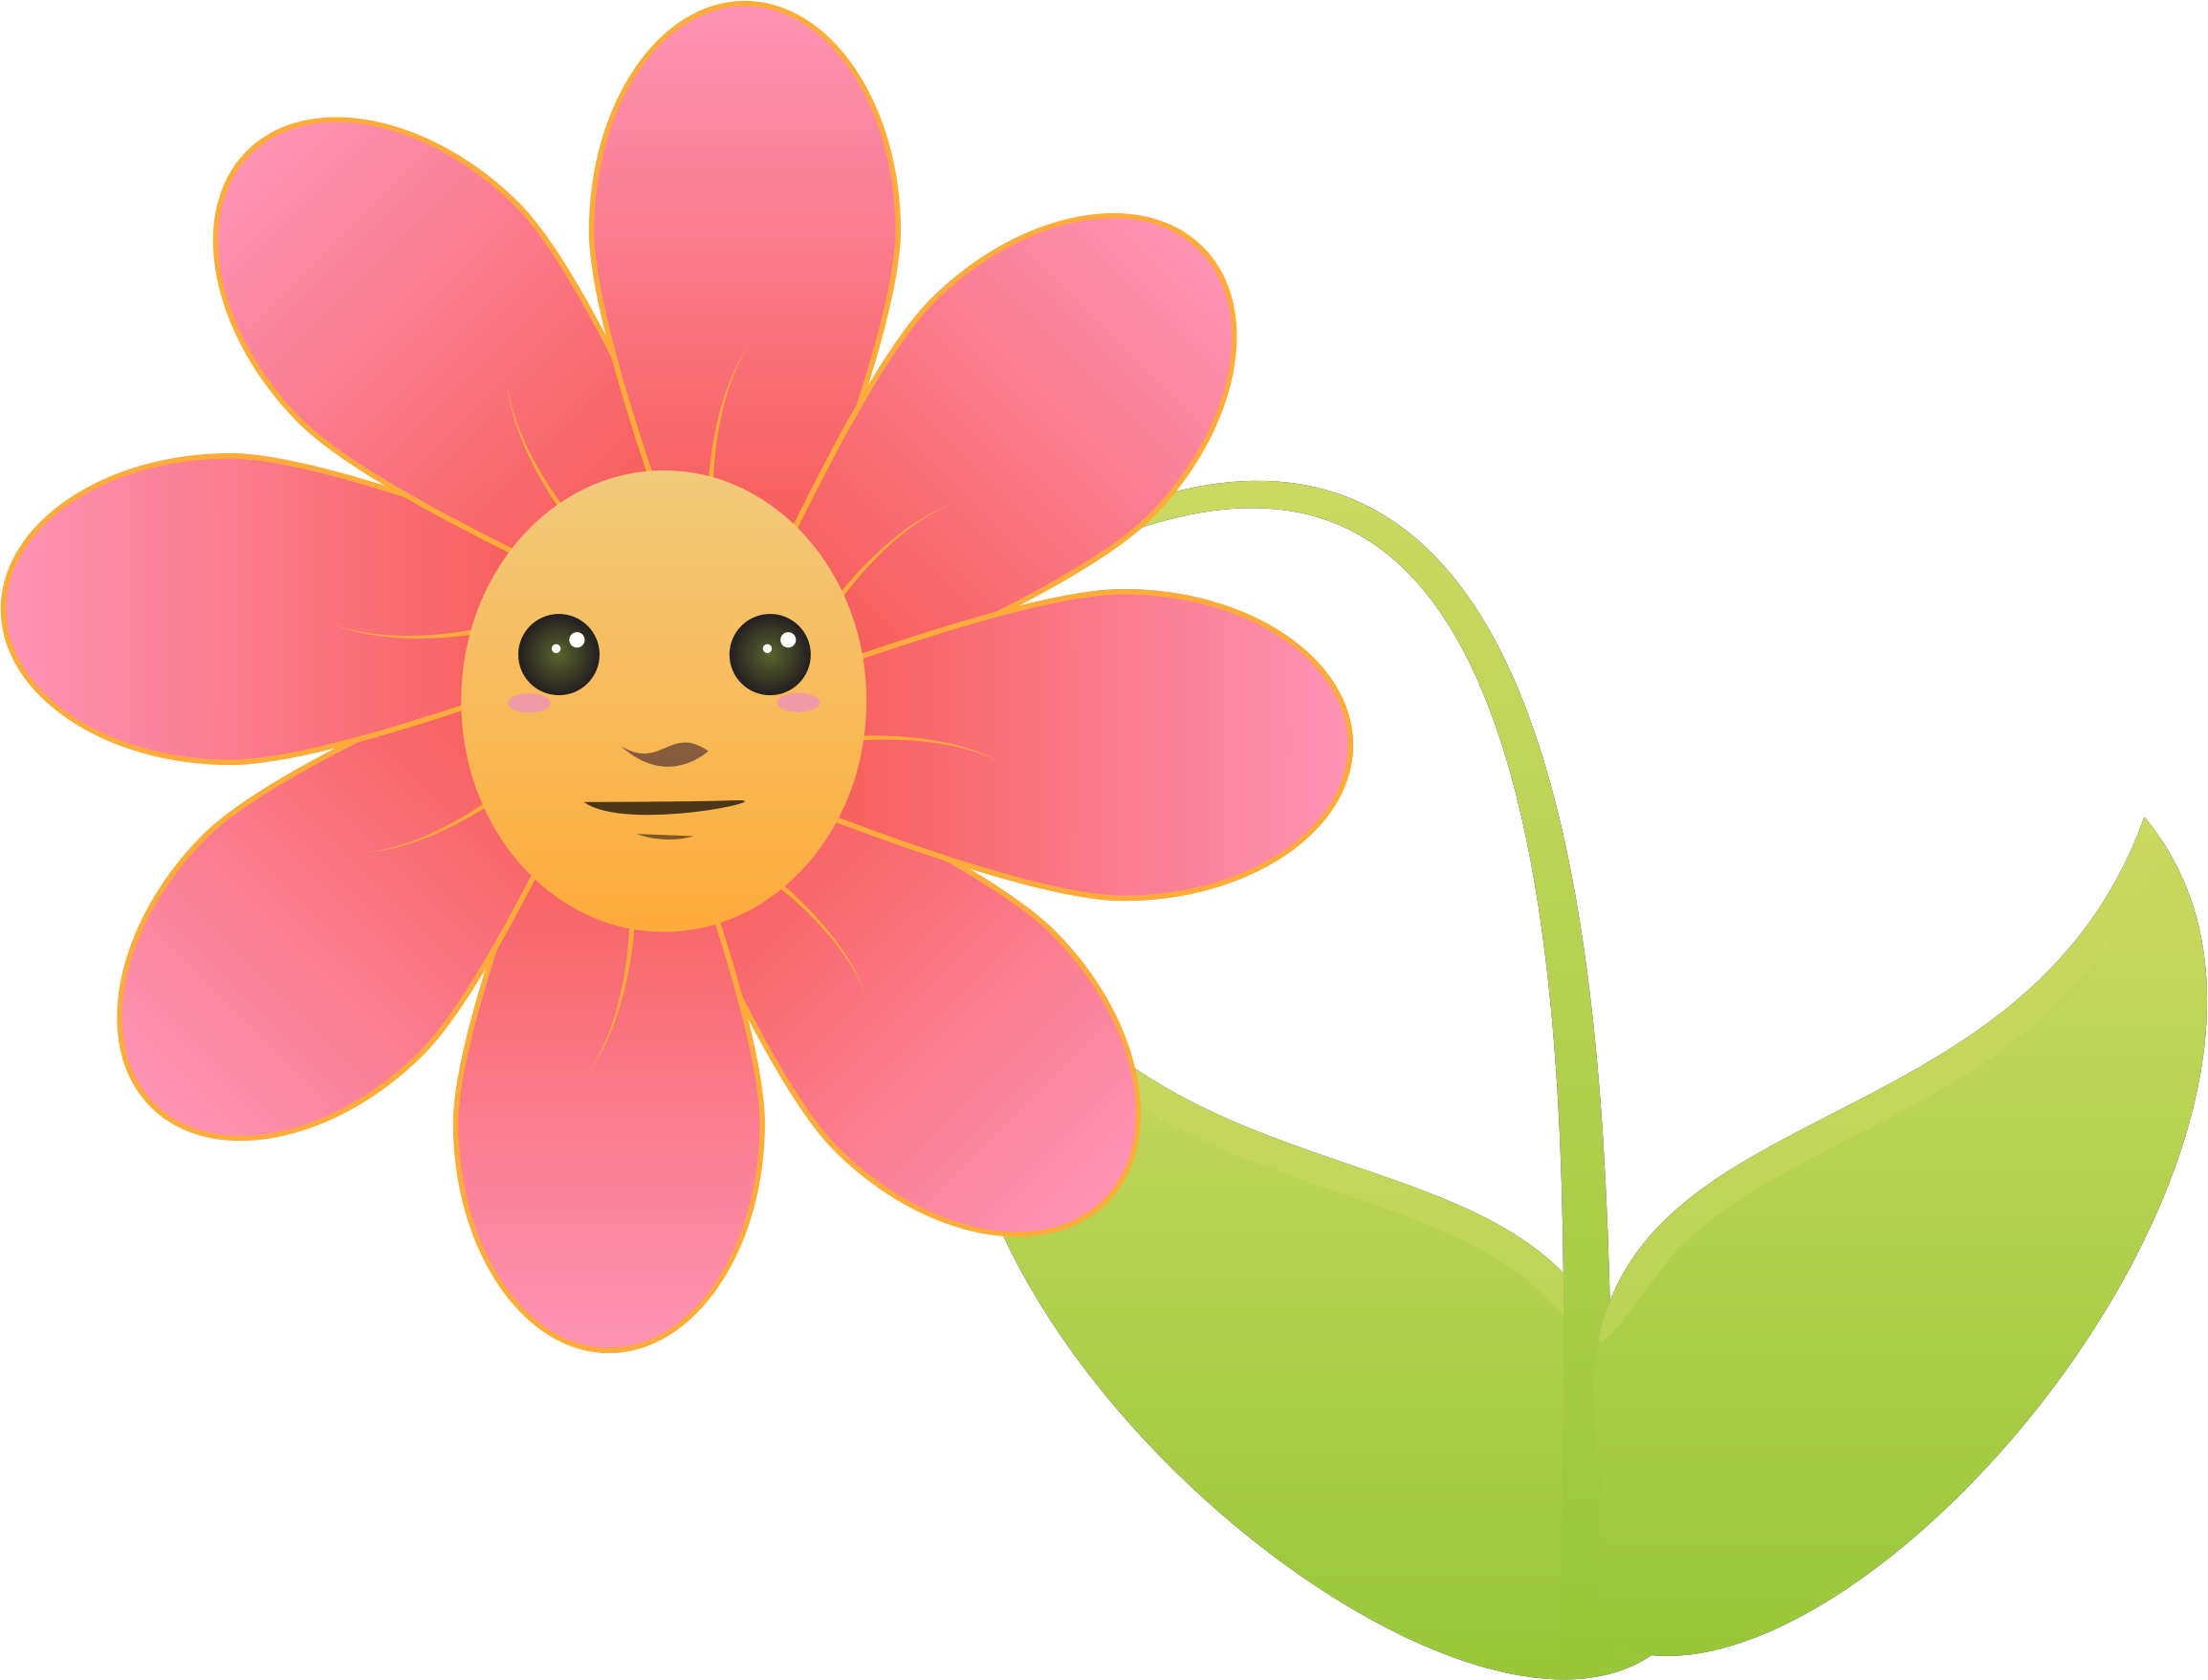 Face flower pencil and. Flowers clipart smile